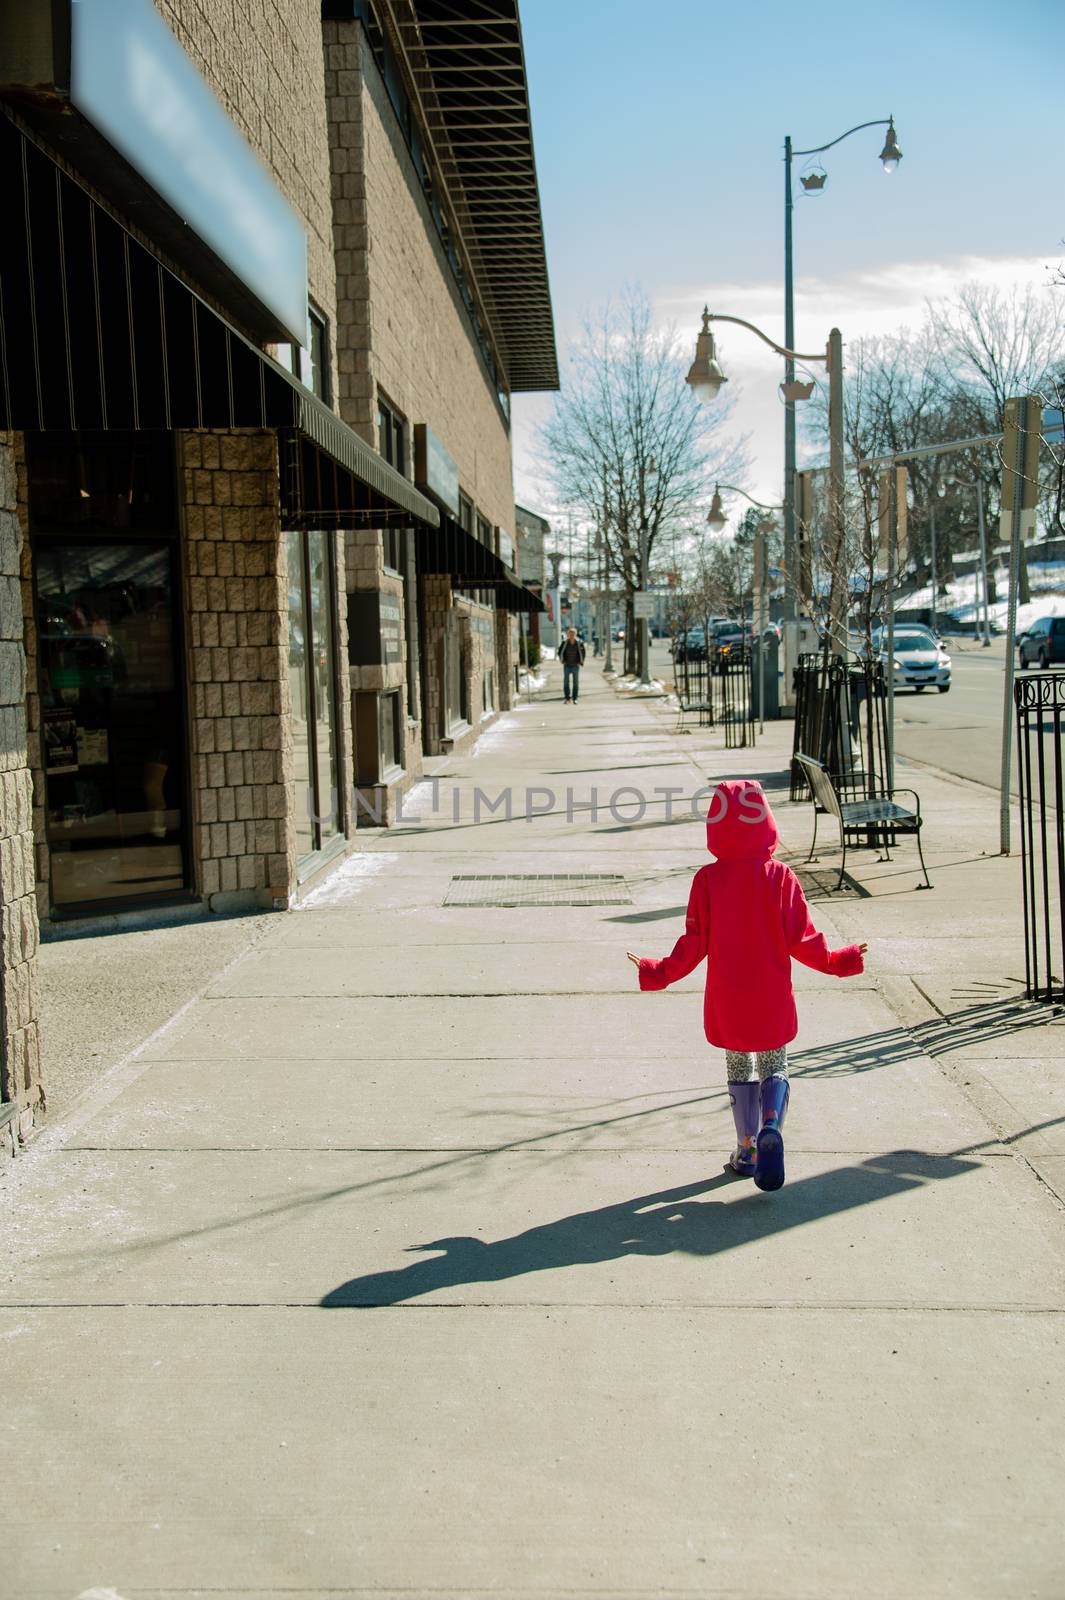  A girl in a red jacket walks the city on the first spring day